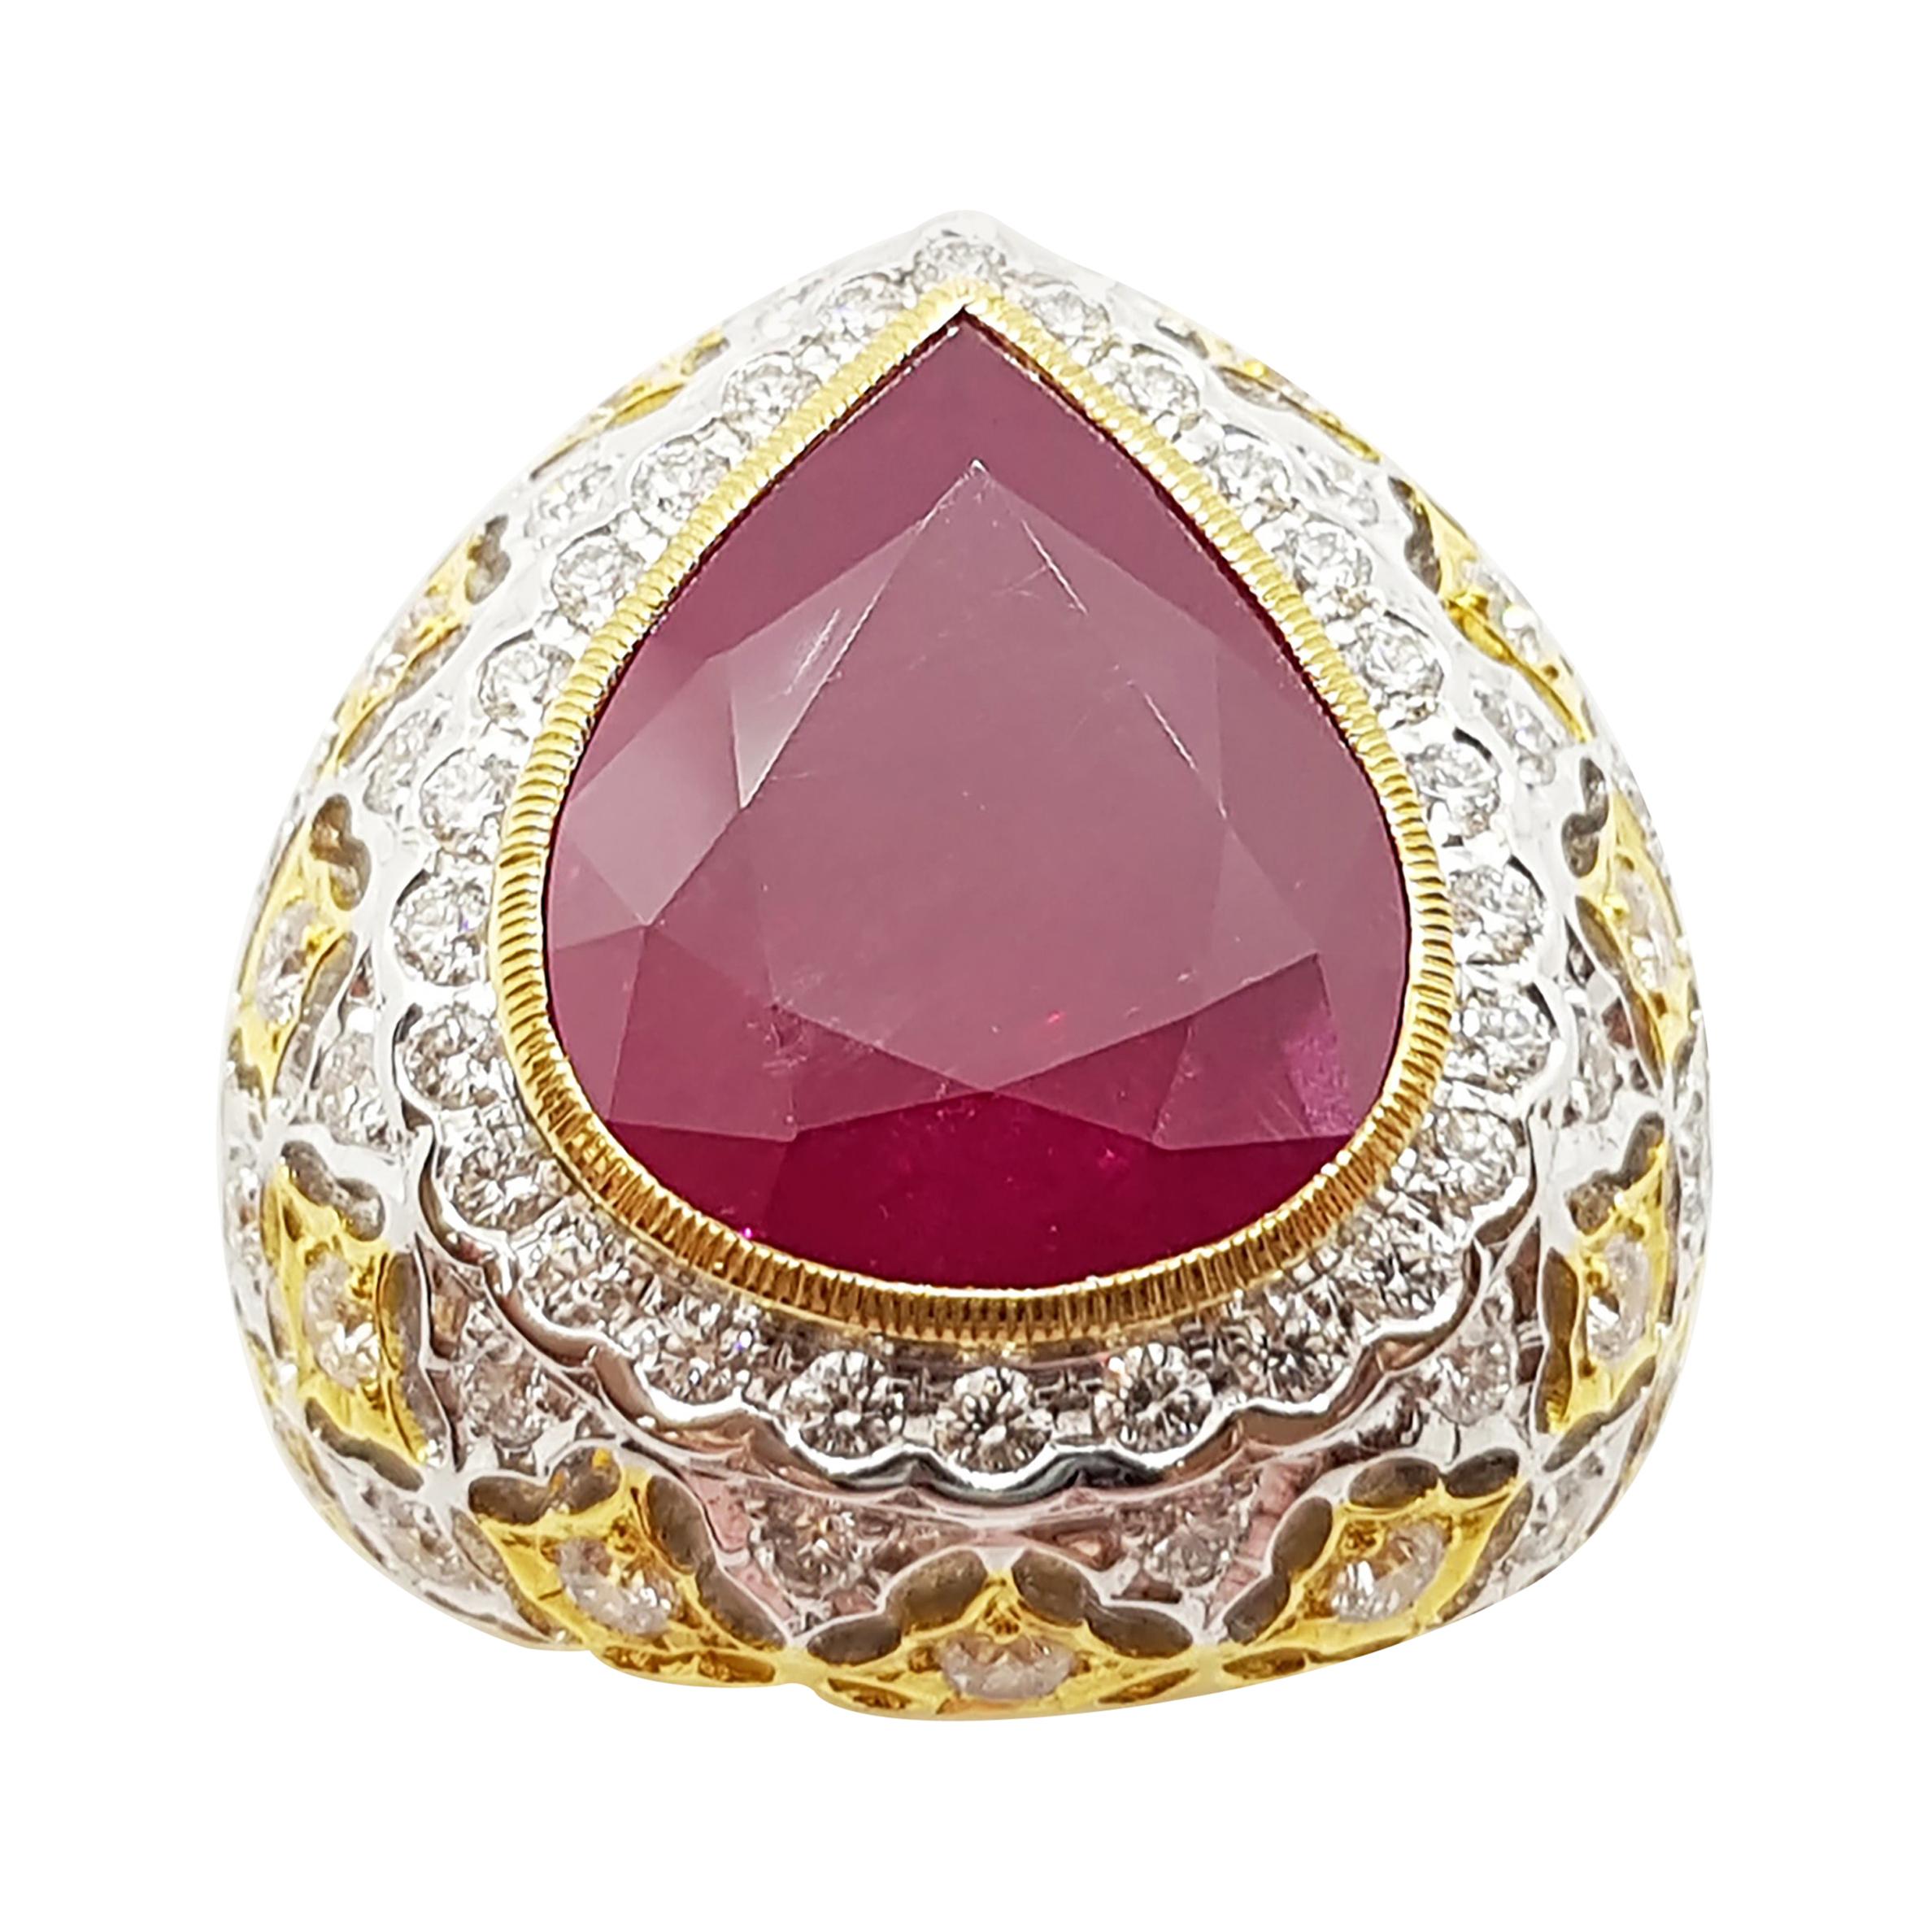 Pear Shape Ruby with Diamond Ring Set in 18 Karat Gold Settings